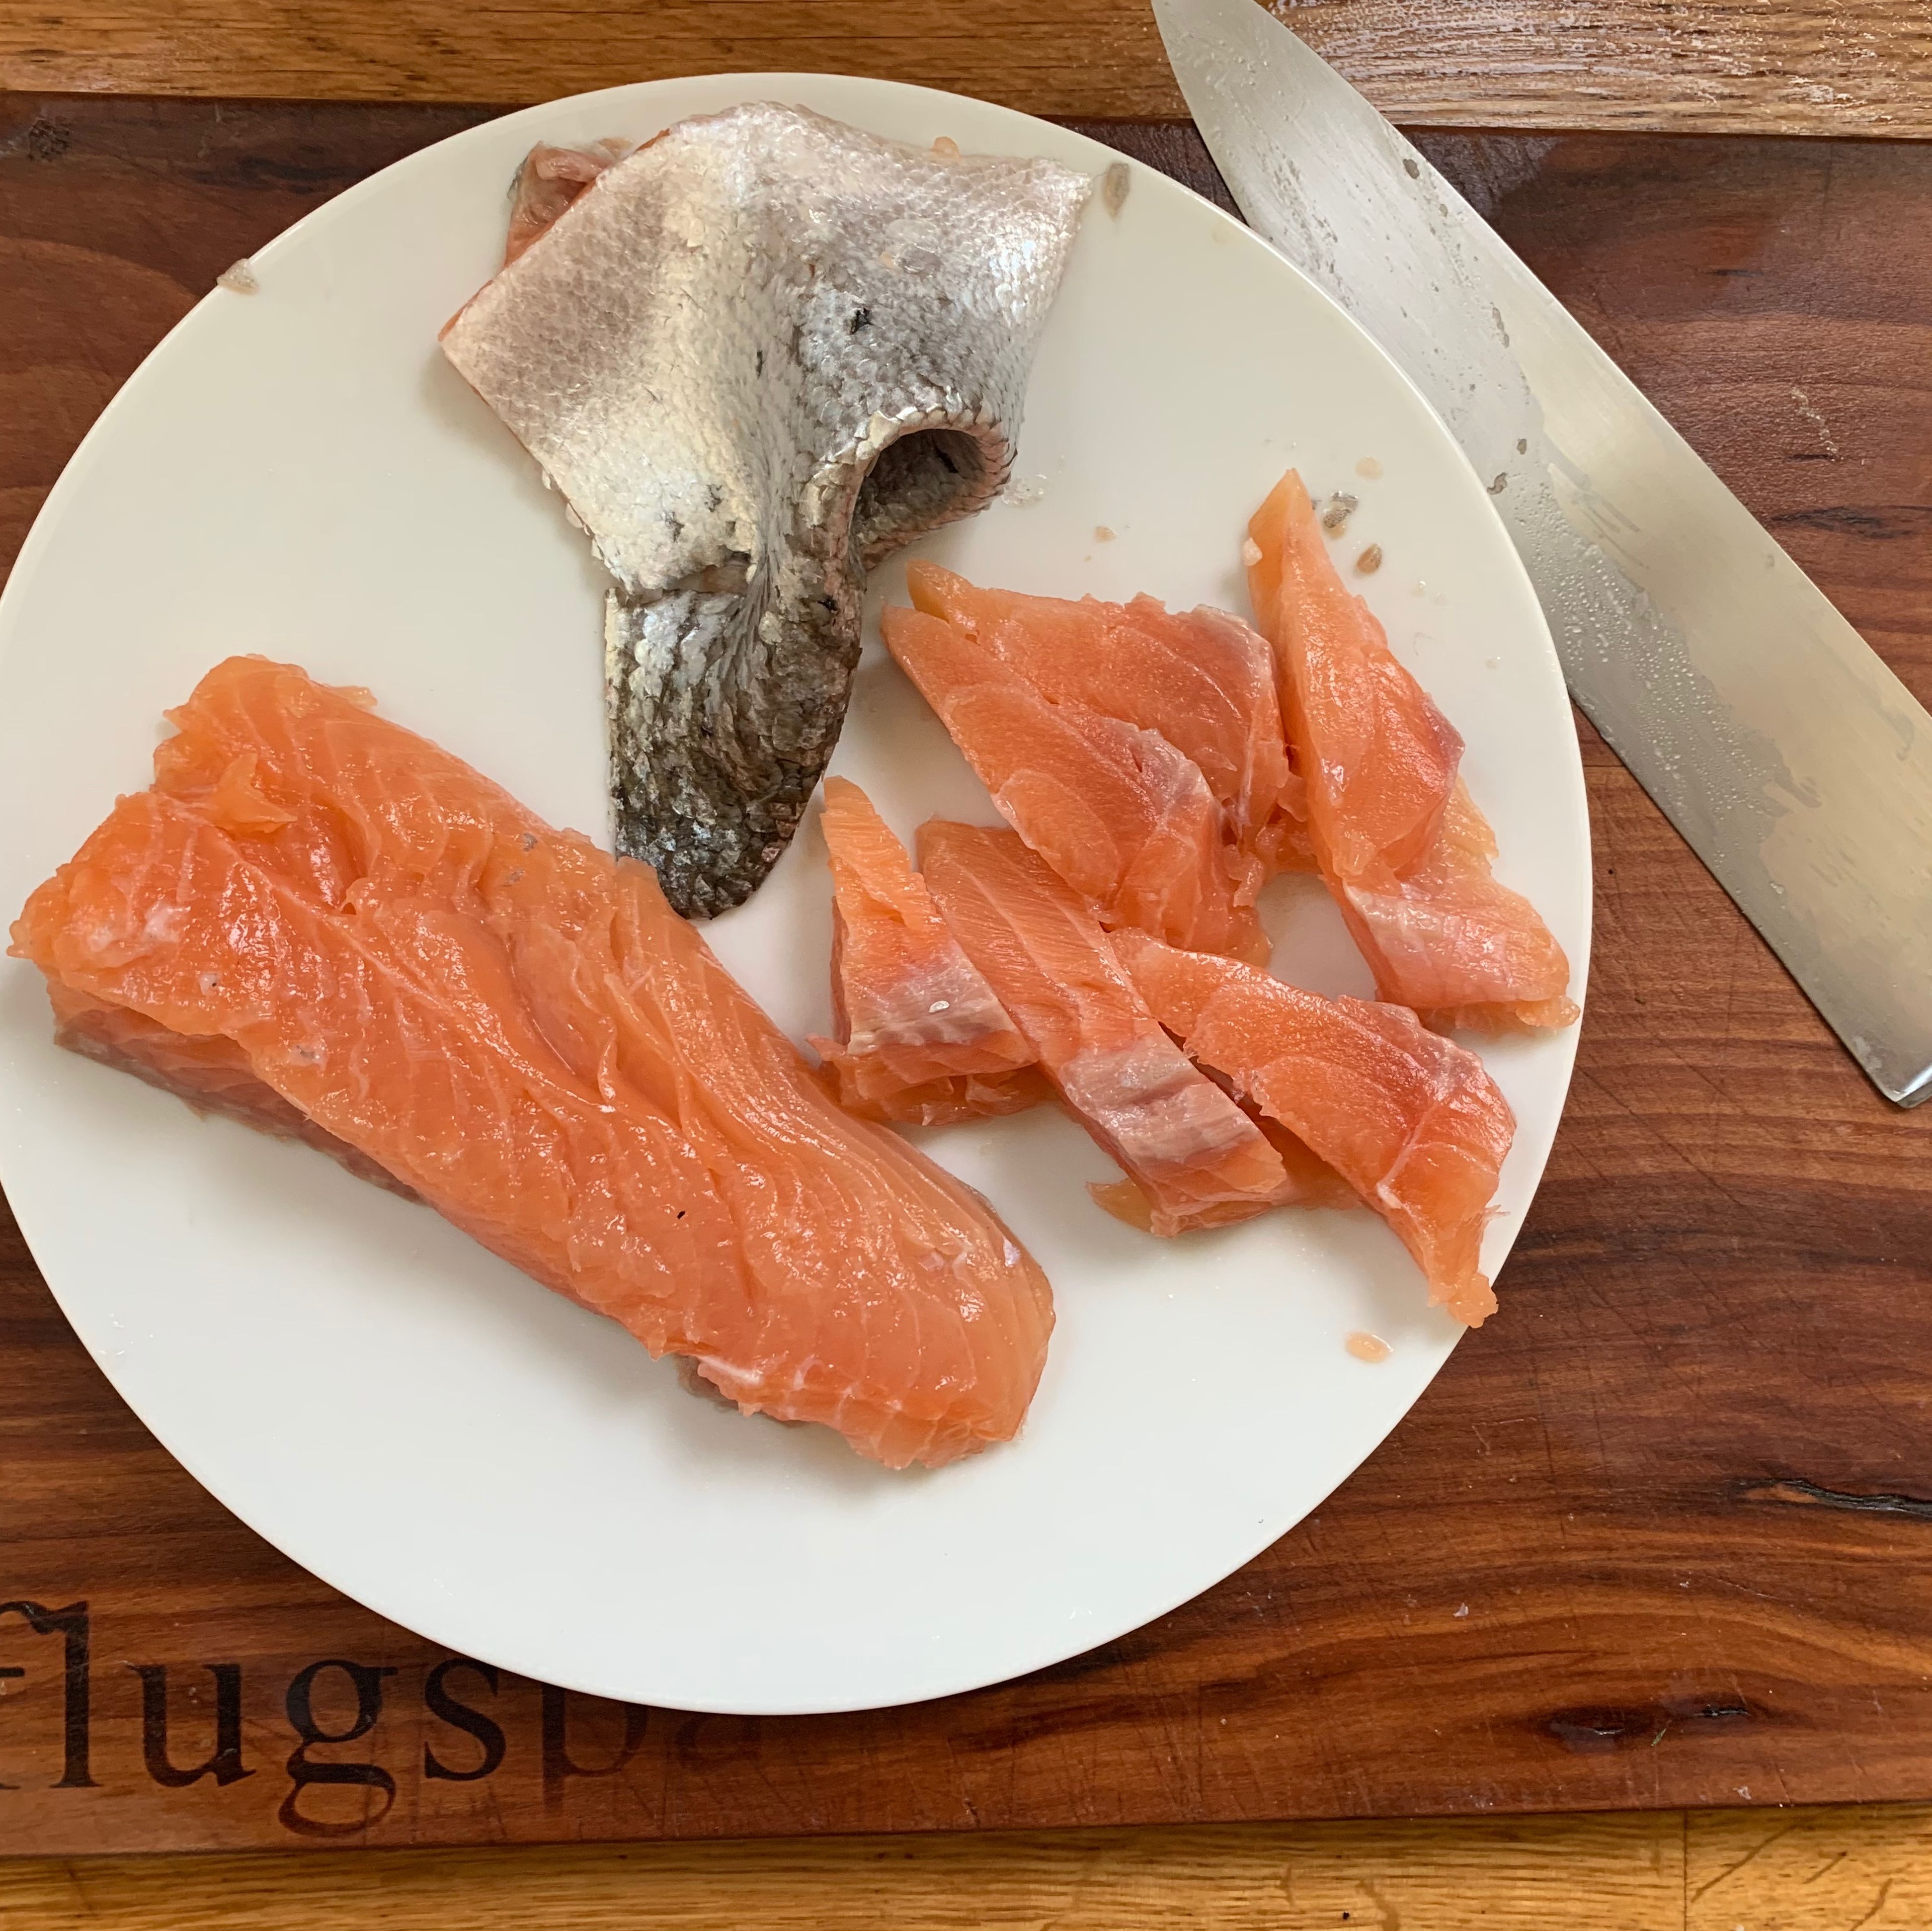 Check salmon for fish bones, remove from skin and cut into 1 cm/0,4 in. wide strips. If using frozen salmon, allow to defrost and cut into slices as well.